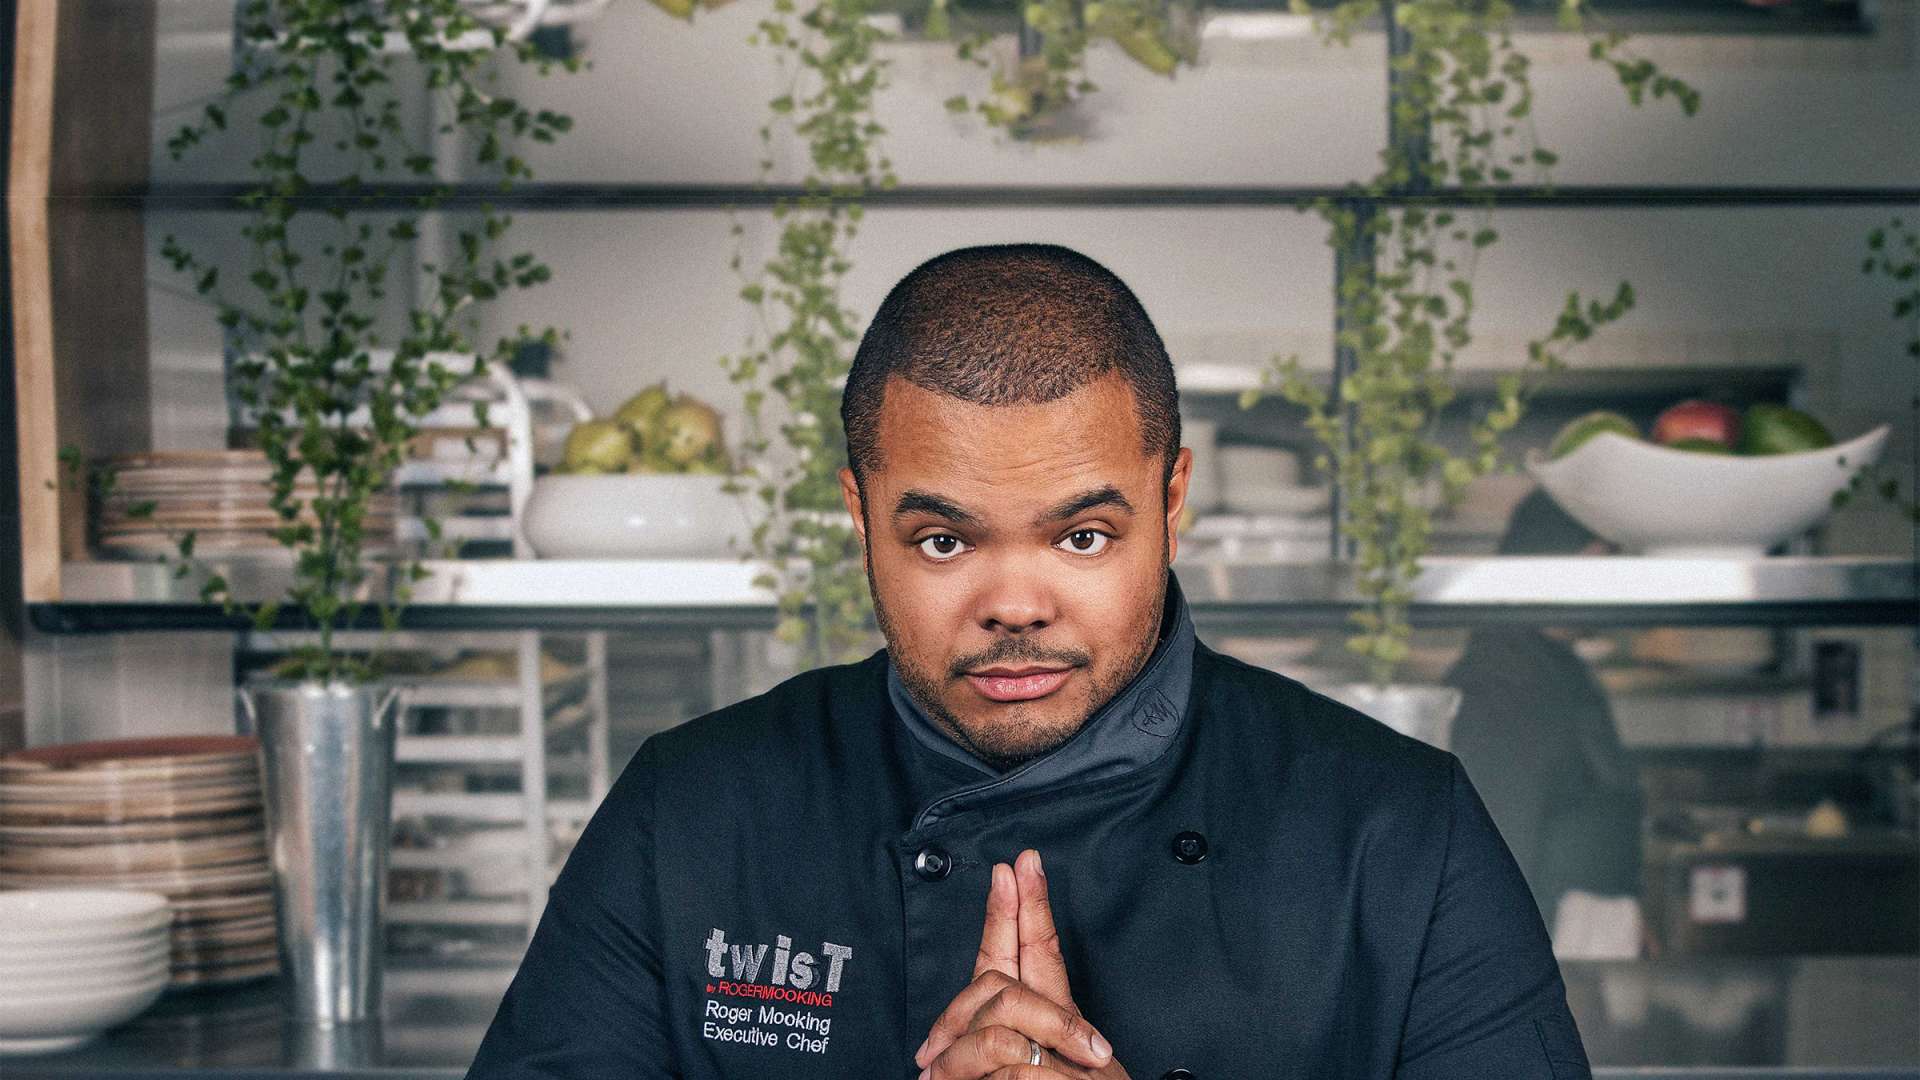 Chef Roger Mooking Image